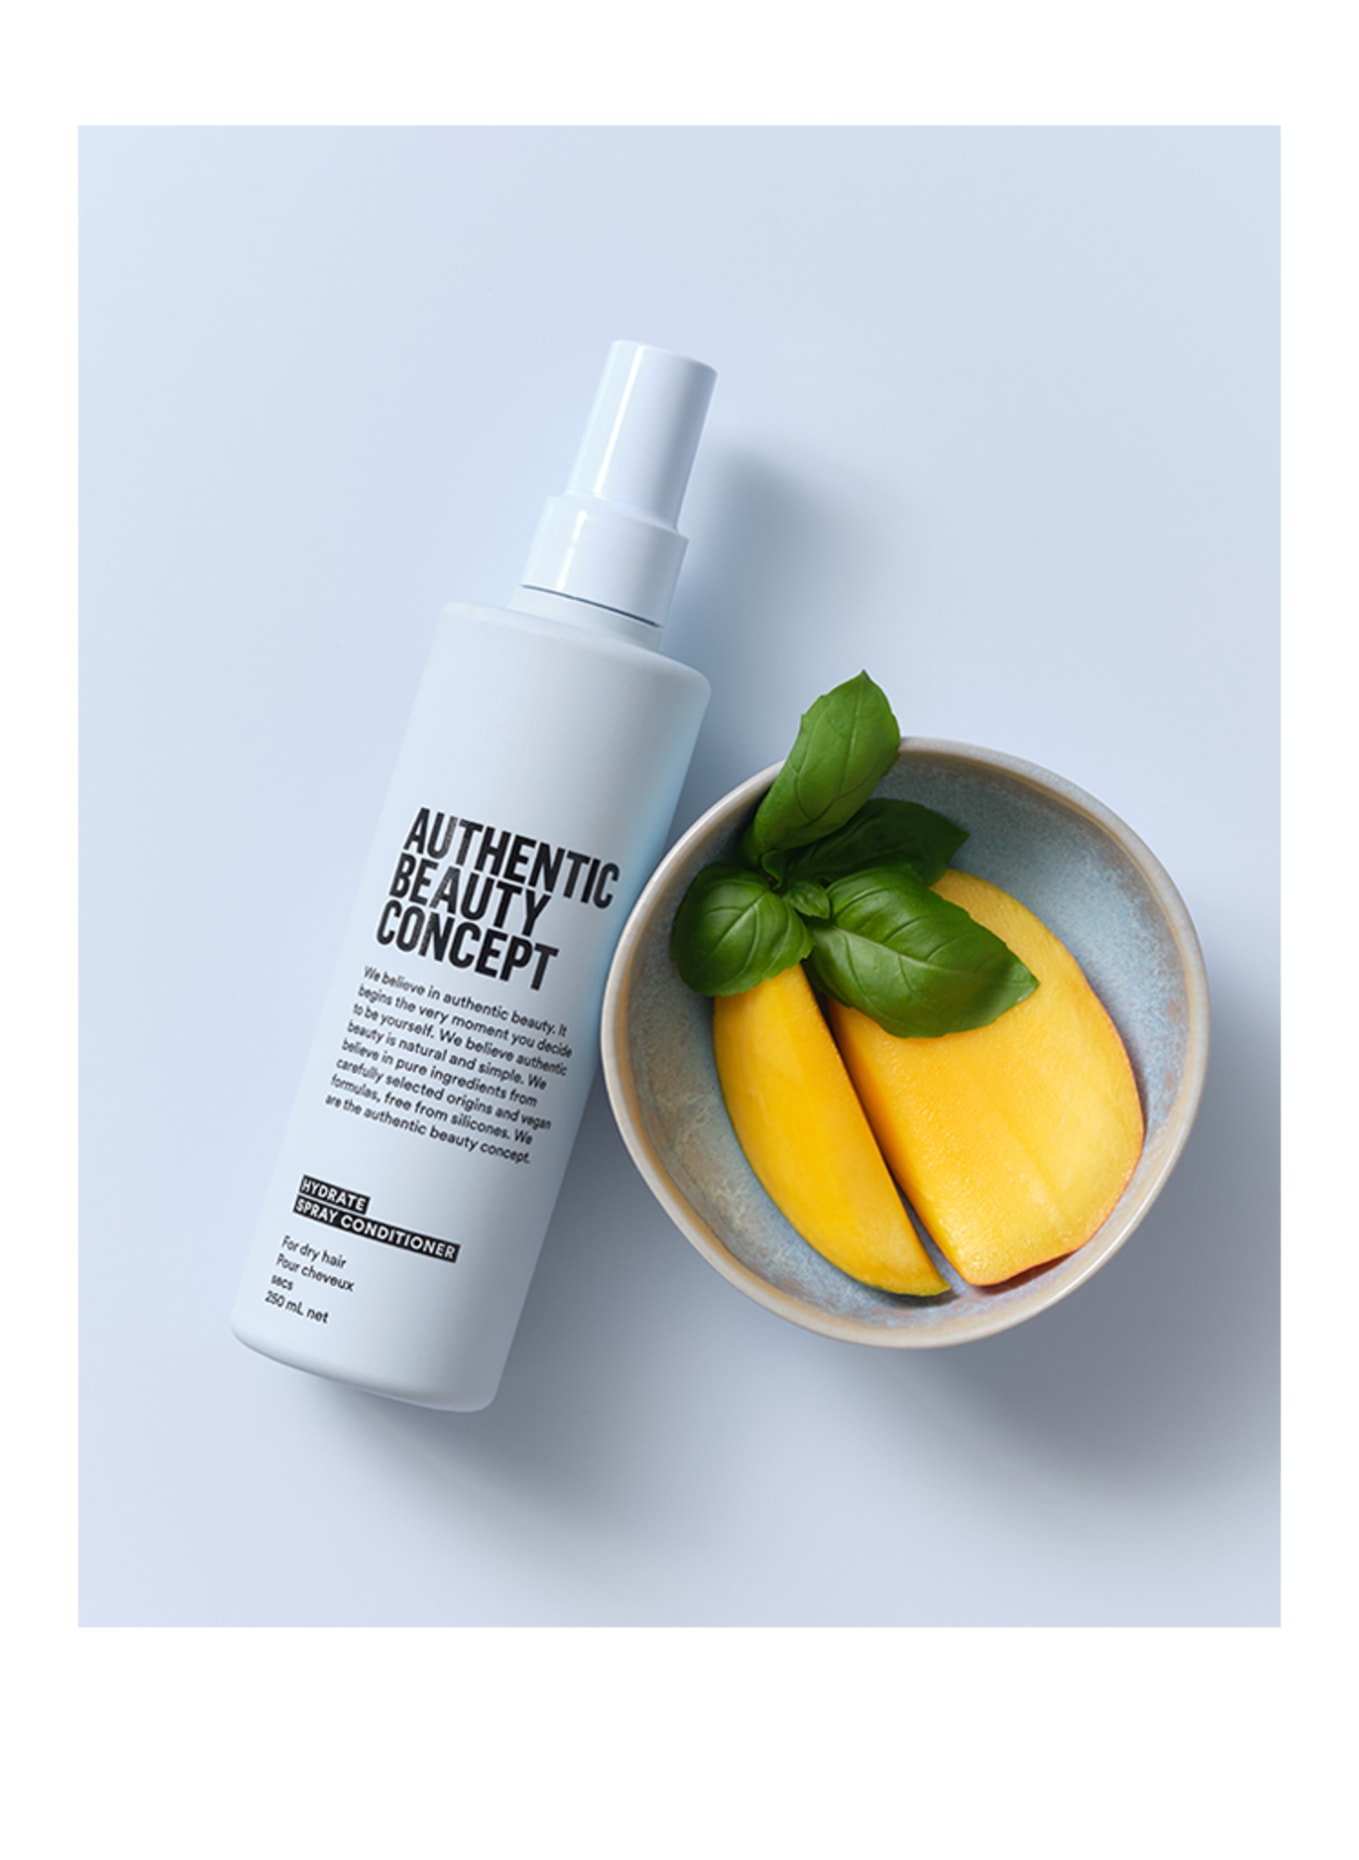 AUTHENTIC BEAUTY CONCEPT HYDRATE SPRAY CONDITIONER (Obrázek 2)